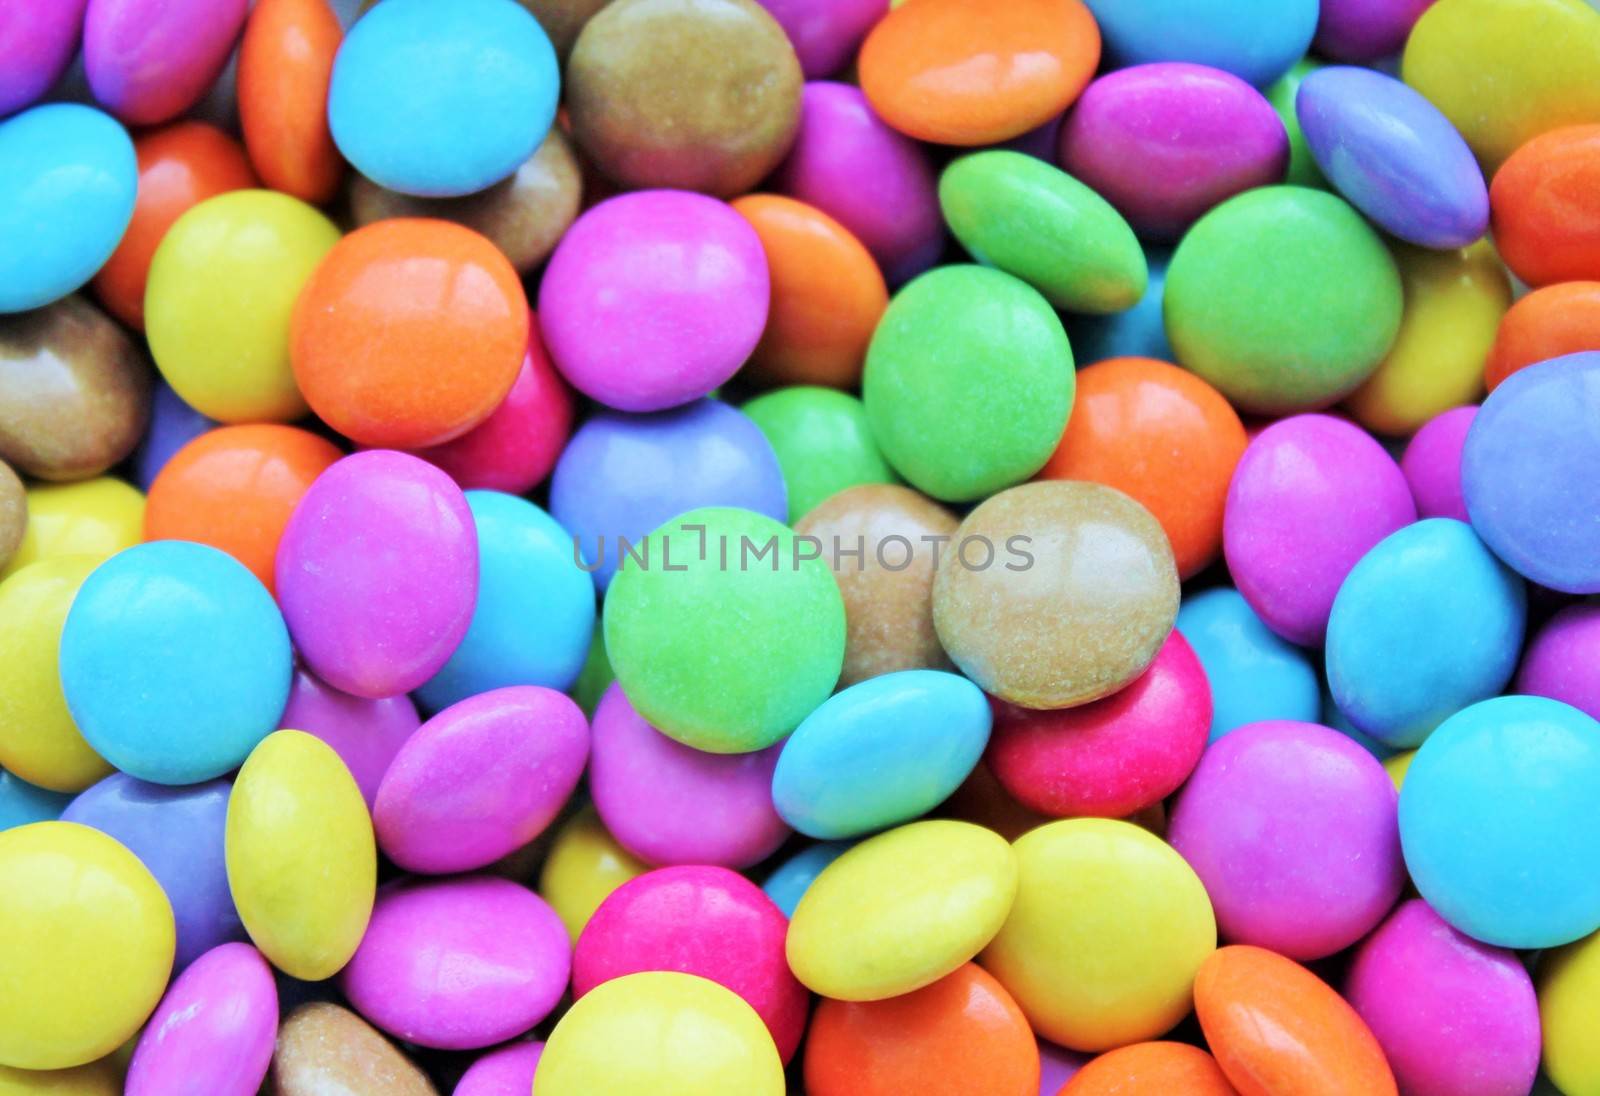 hard Colored candy smarties texture pattern background by cheekylorns